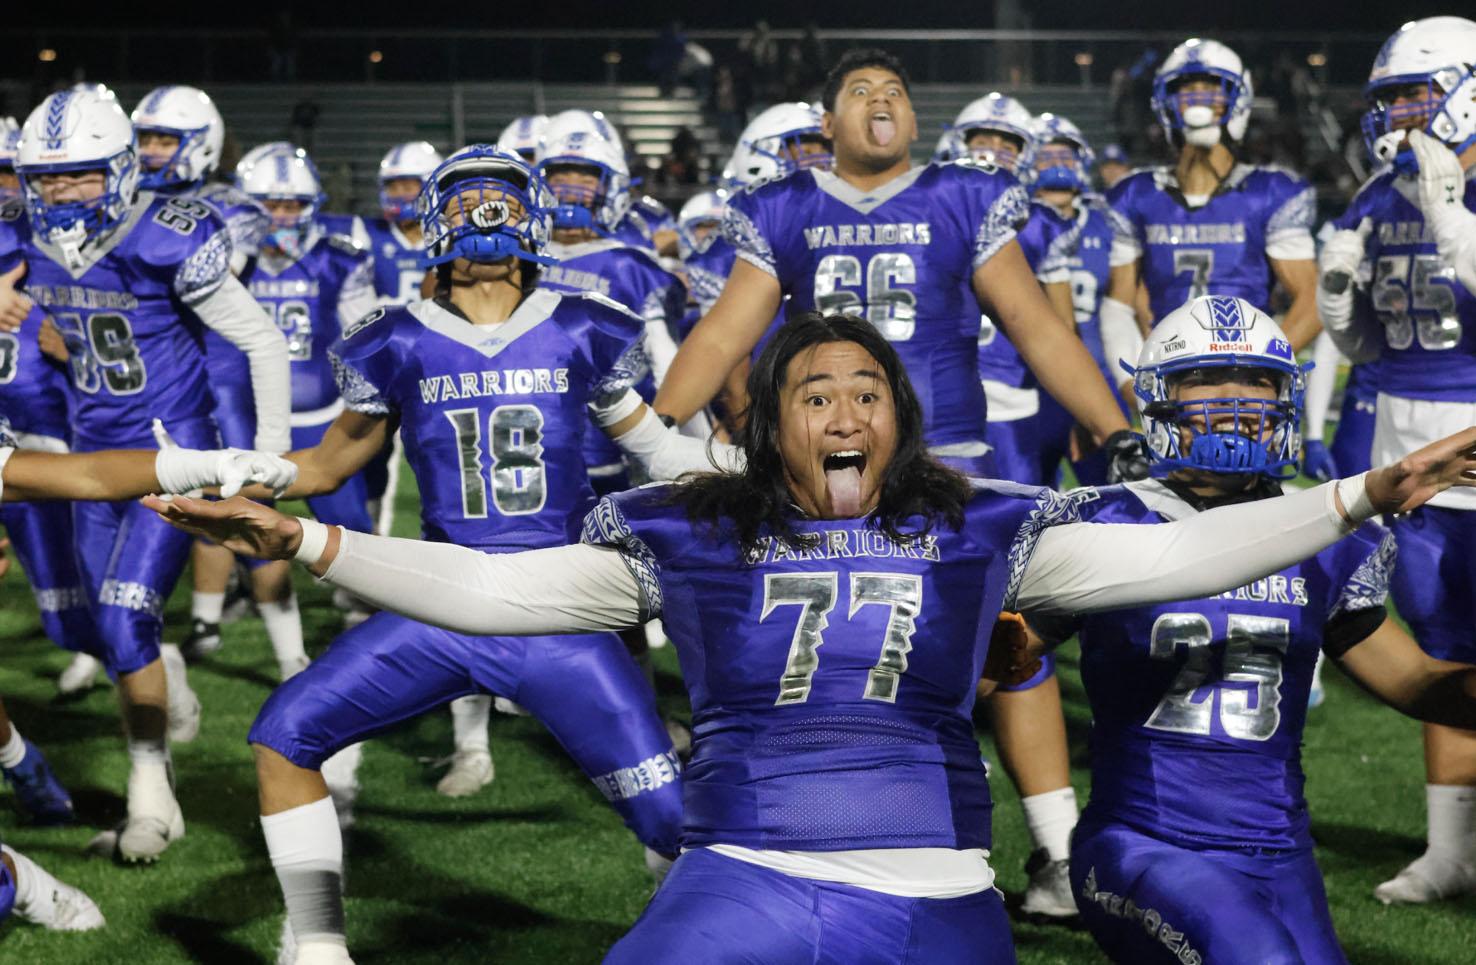 South City senior Soblessed Mauia front and center during the team’s traditional postgame Haka following the CCS Division V championship game Saturday night at MacDonald High School. (Source: Jarrel  Paloma)